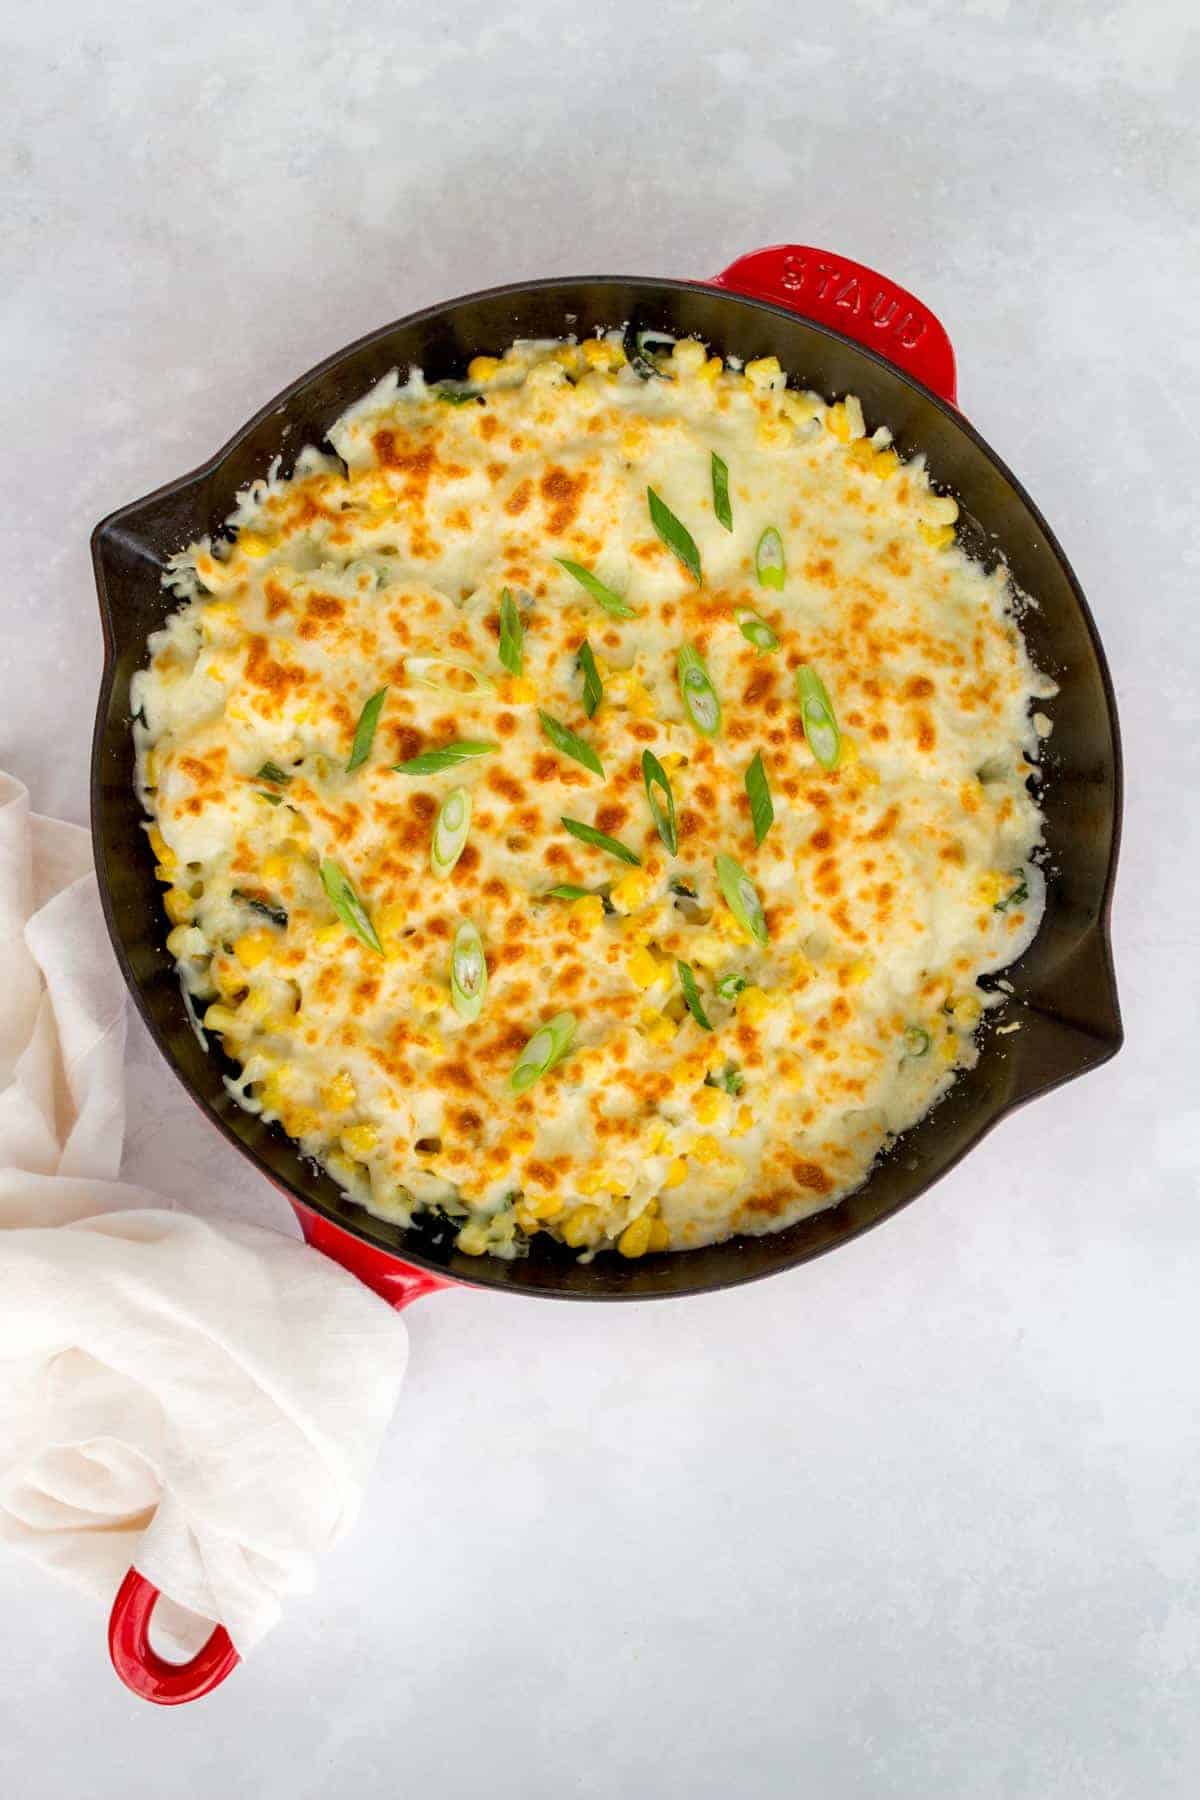 A red Staub cast iron with Korean cheese corn.